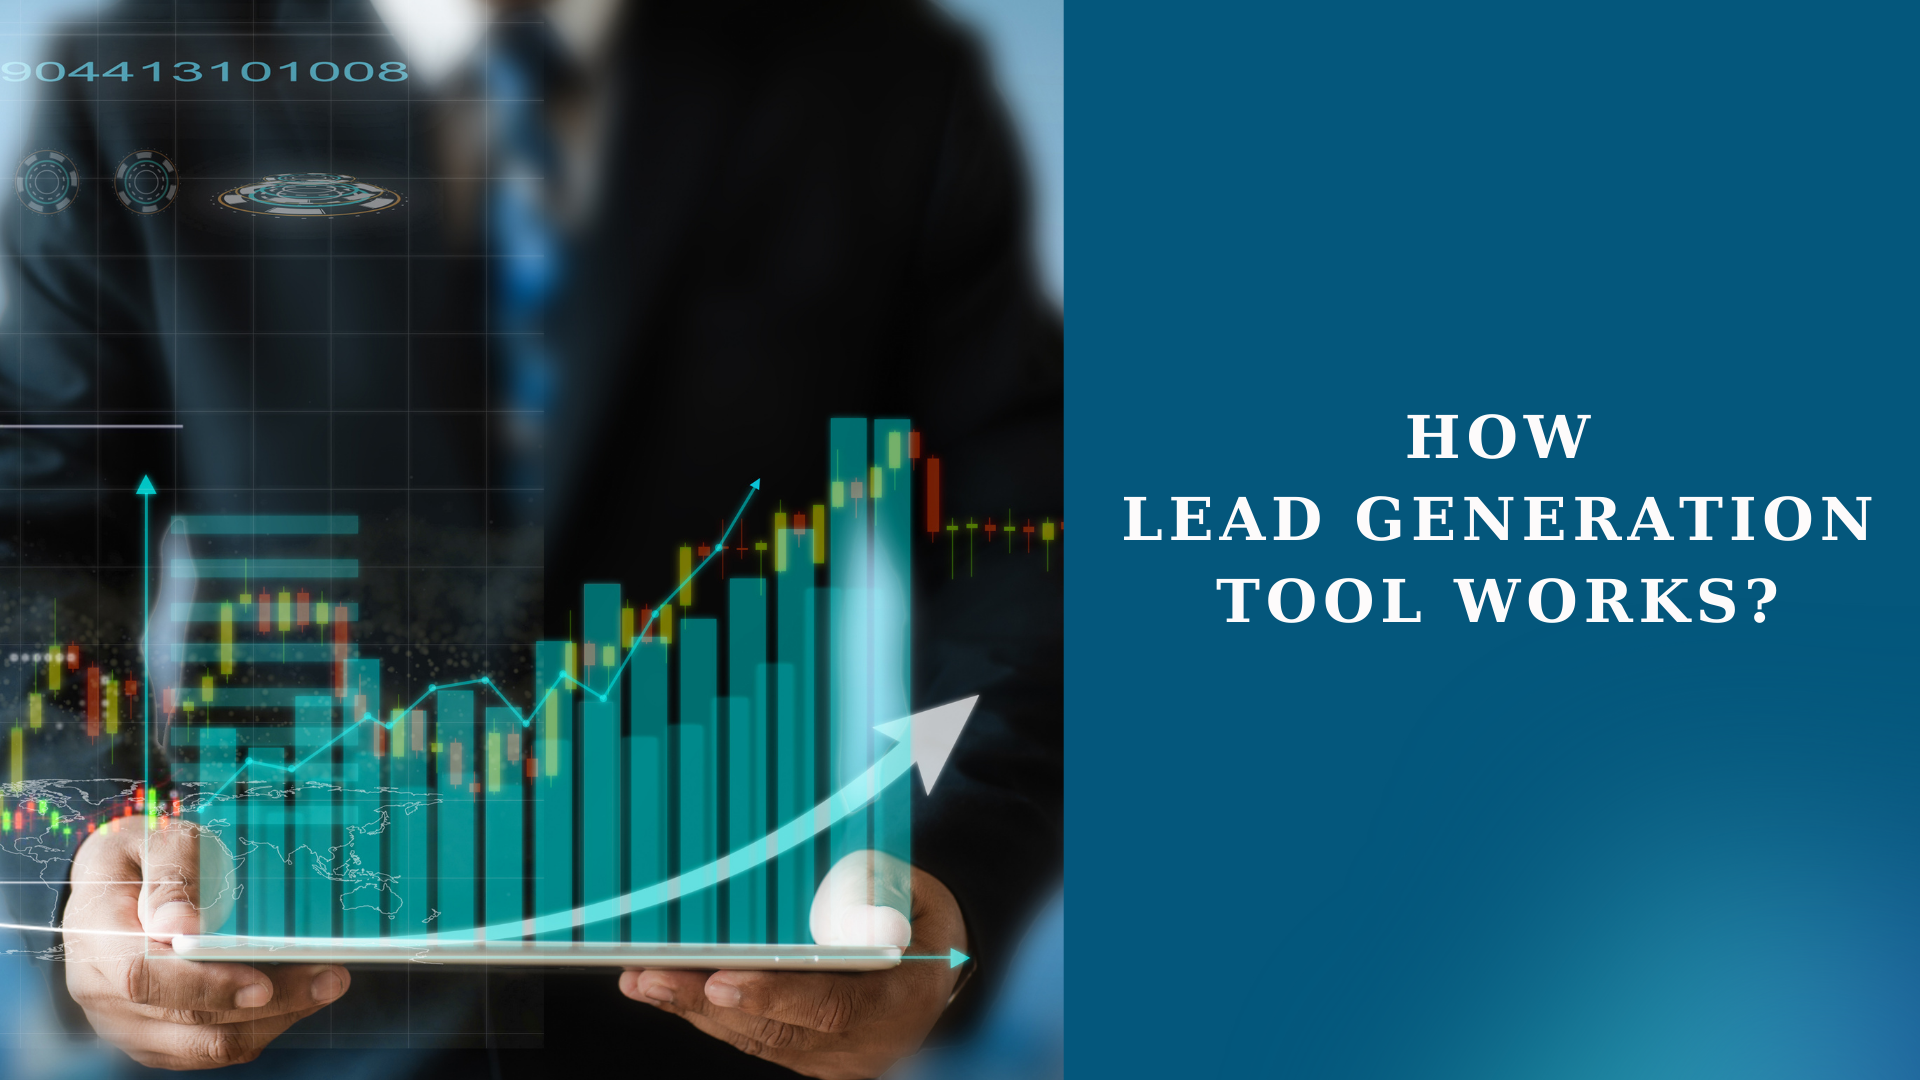 How Lead Generation Tool Works?